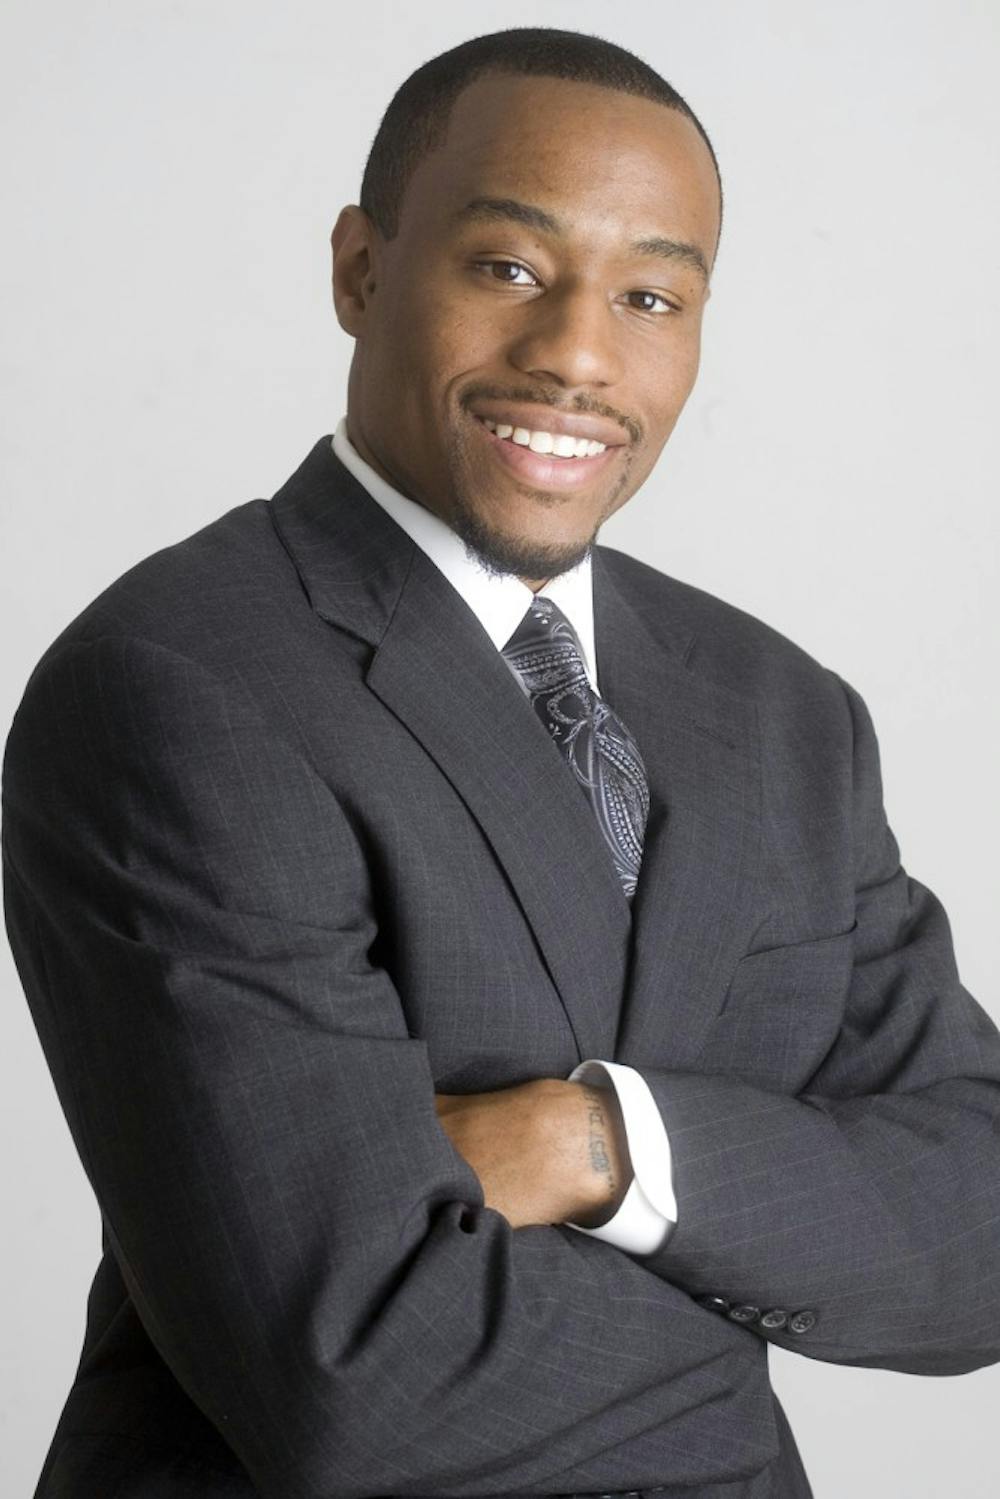 Marc Lamont Hill was to speak for Unity Week Tuesday but Hill cancelled on Jan. 12 due to a scheduling conflict. PHOTO COURTESY OF WIKIPEDIA.ORG